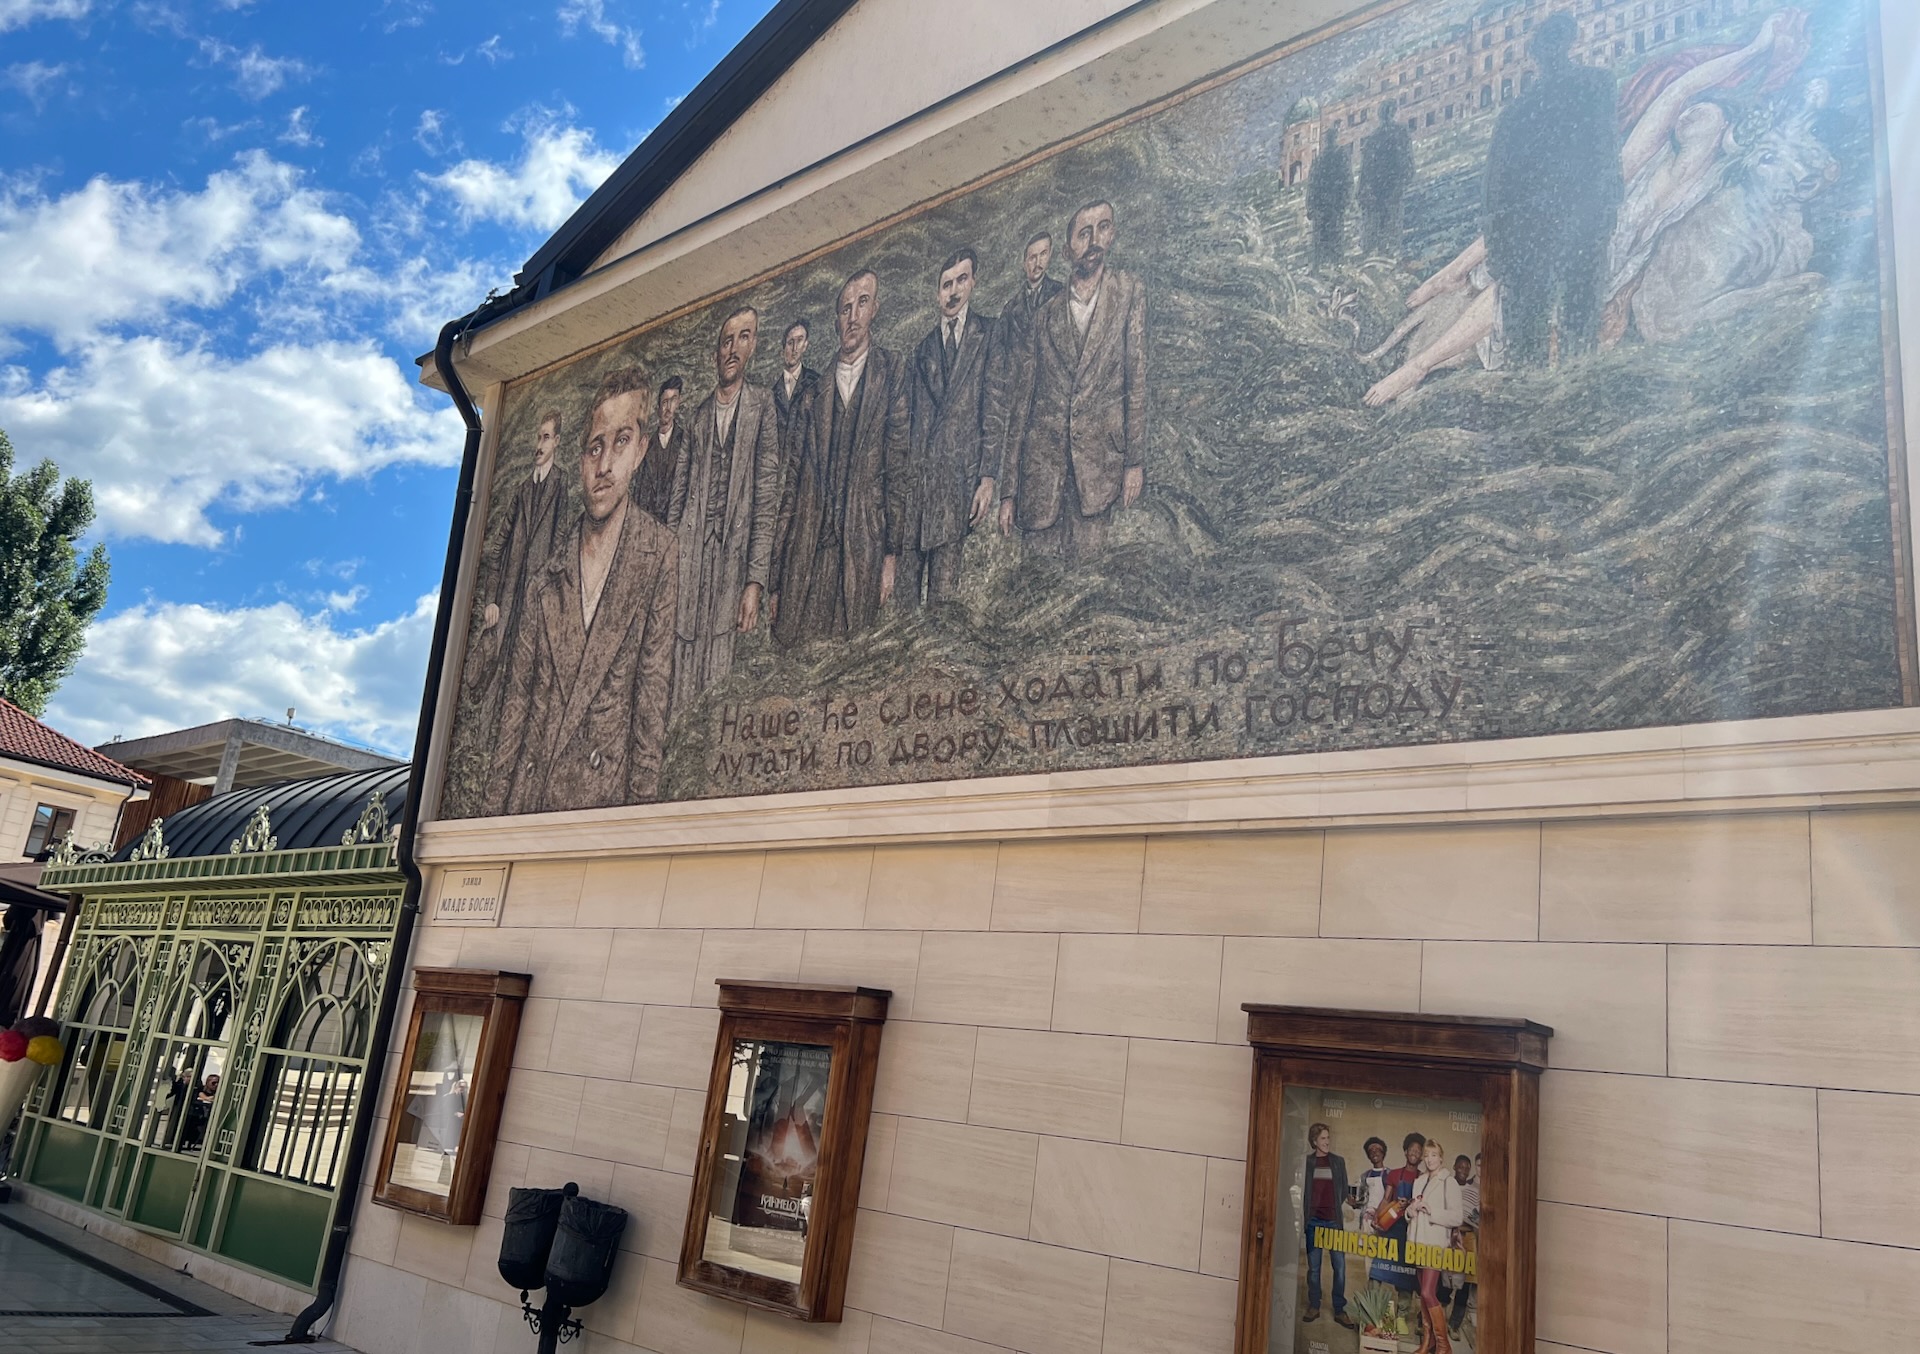 The Mural on the Movie Theater.